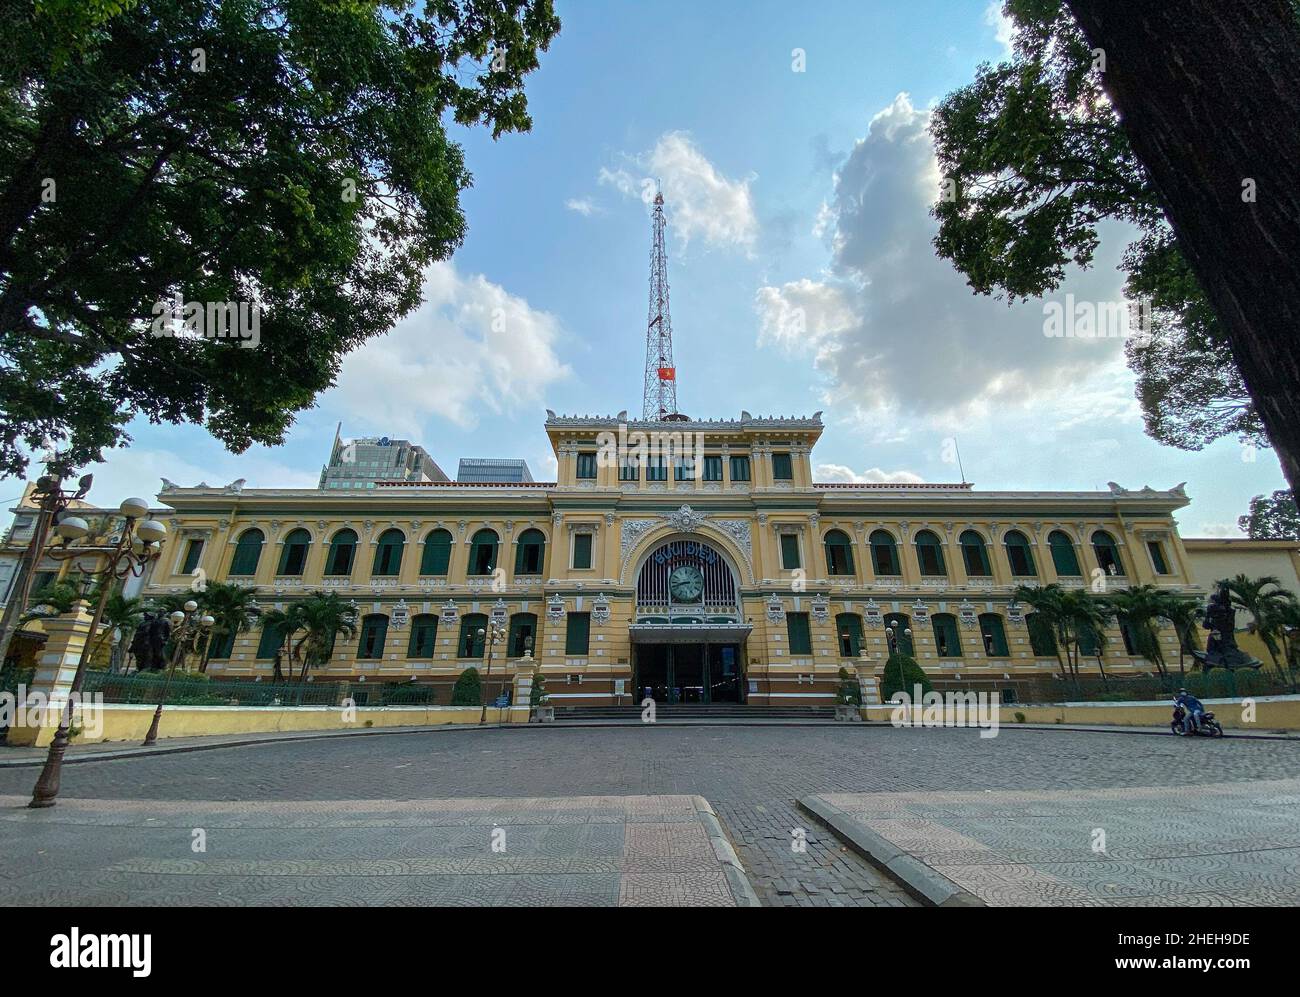 Saigon, Vietnam - Jun 22, 2020. View of Central Post Office, built in 1891 in Saigon, Vietnam. The church is established by French colonists. Stock Photo